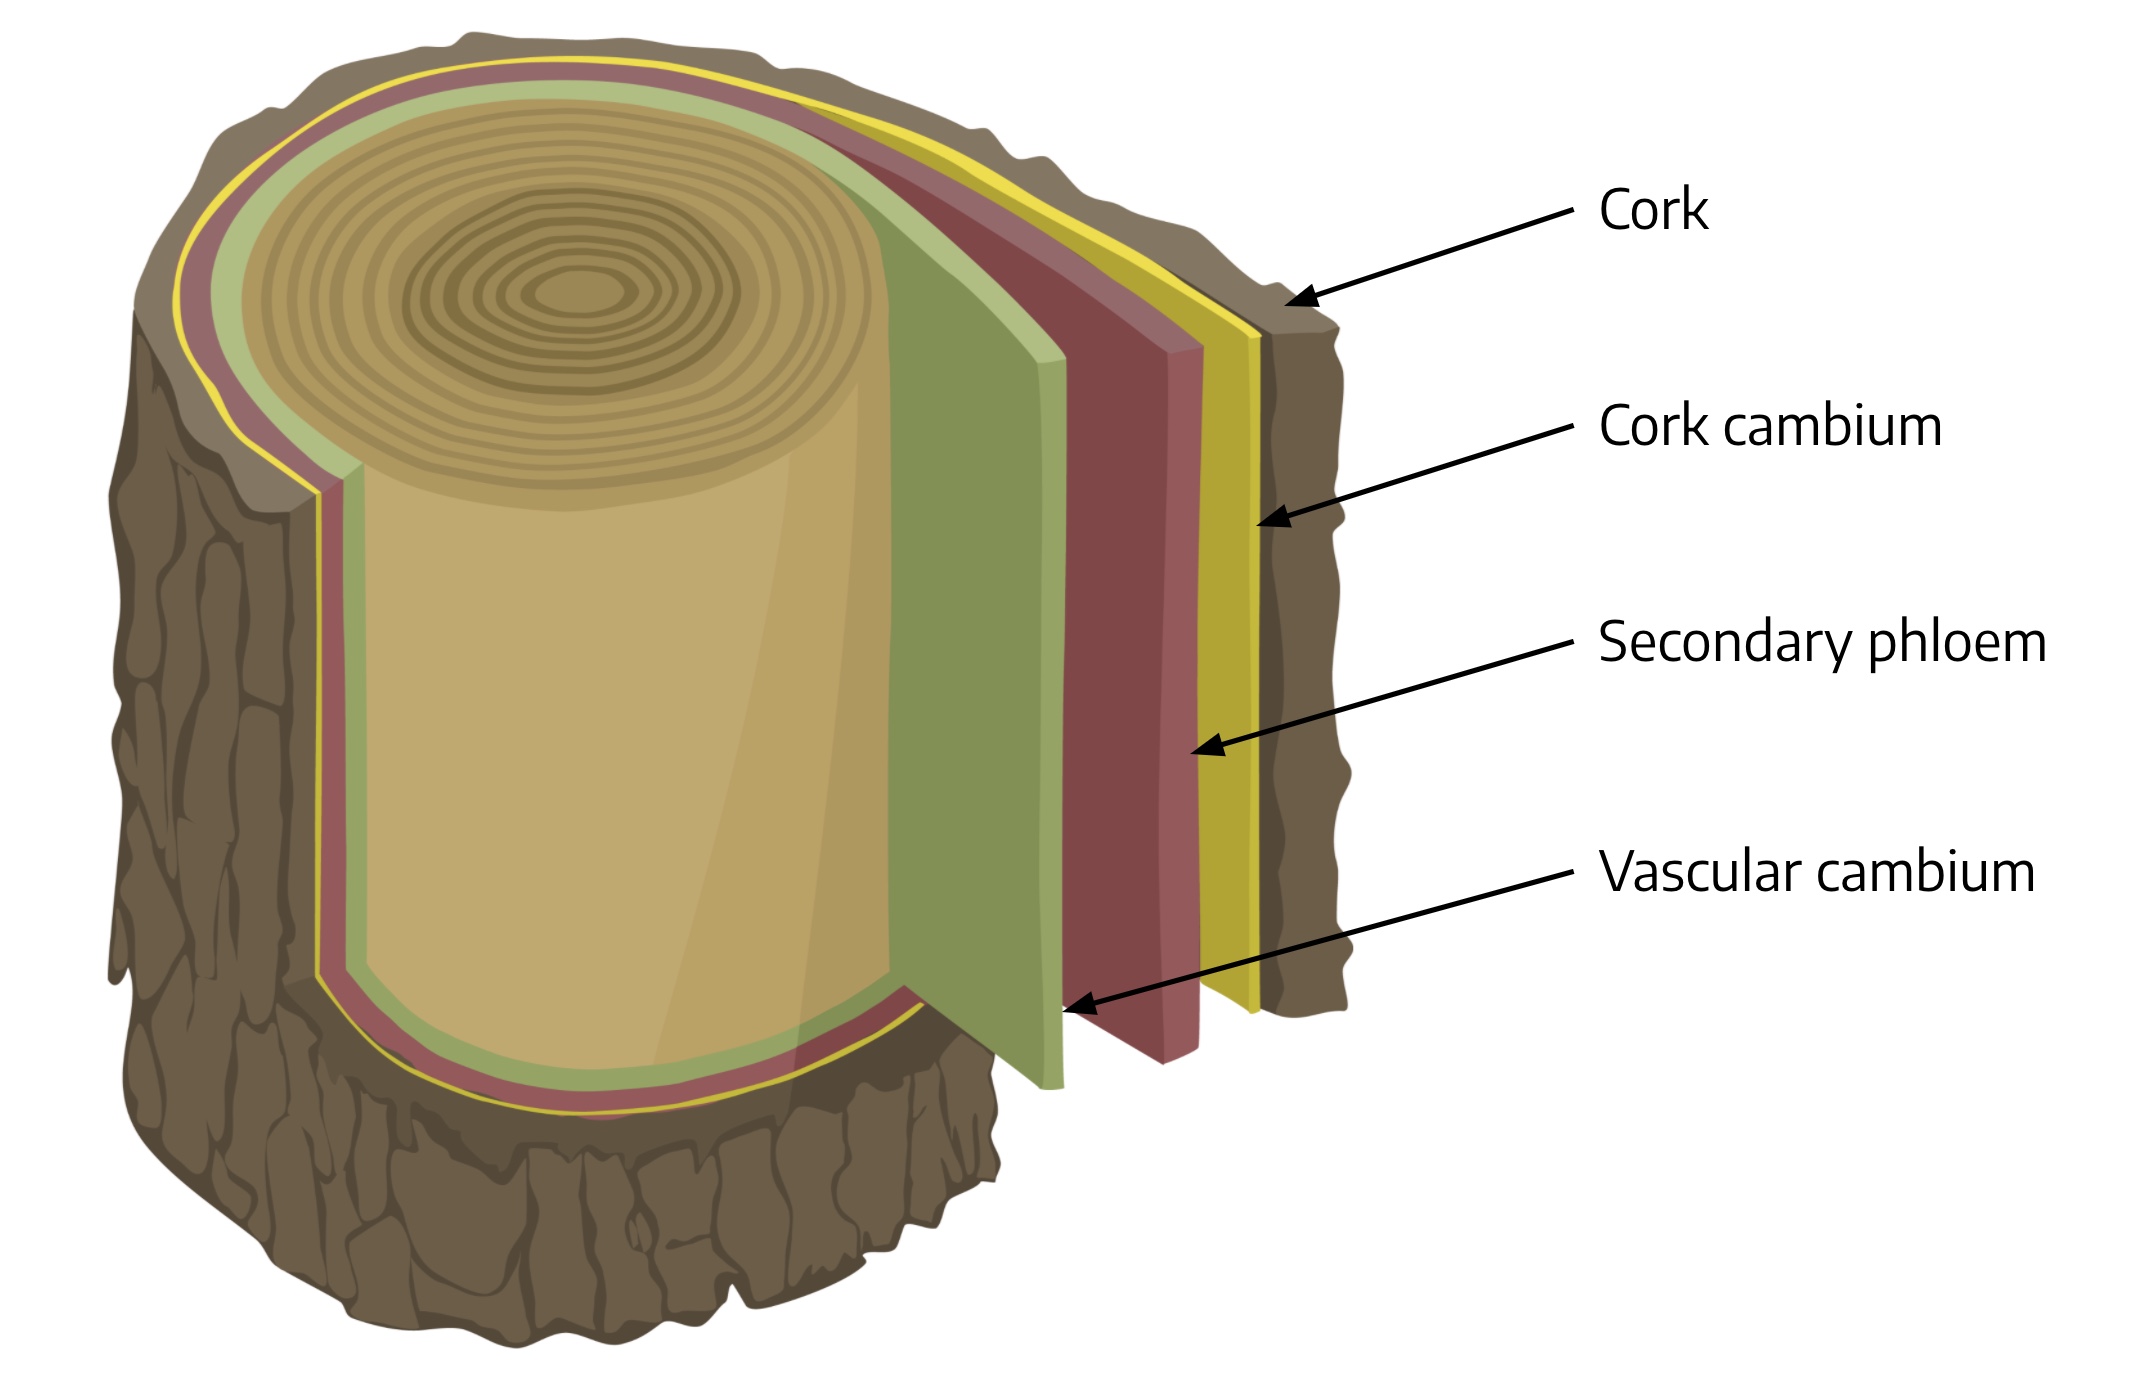 Graphic of trunk cross section with cork, cork cambium, secondary phloem, and vascular cambium labled.